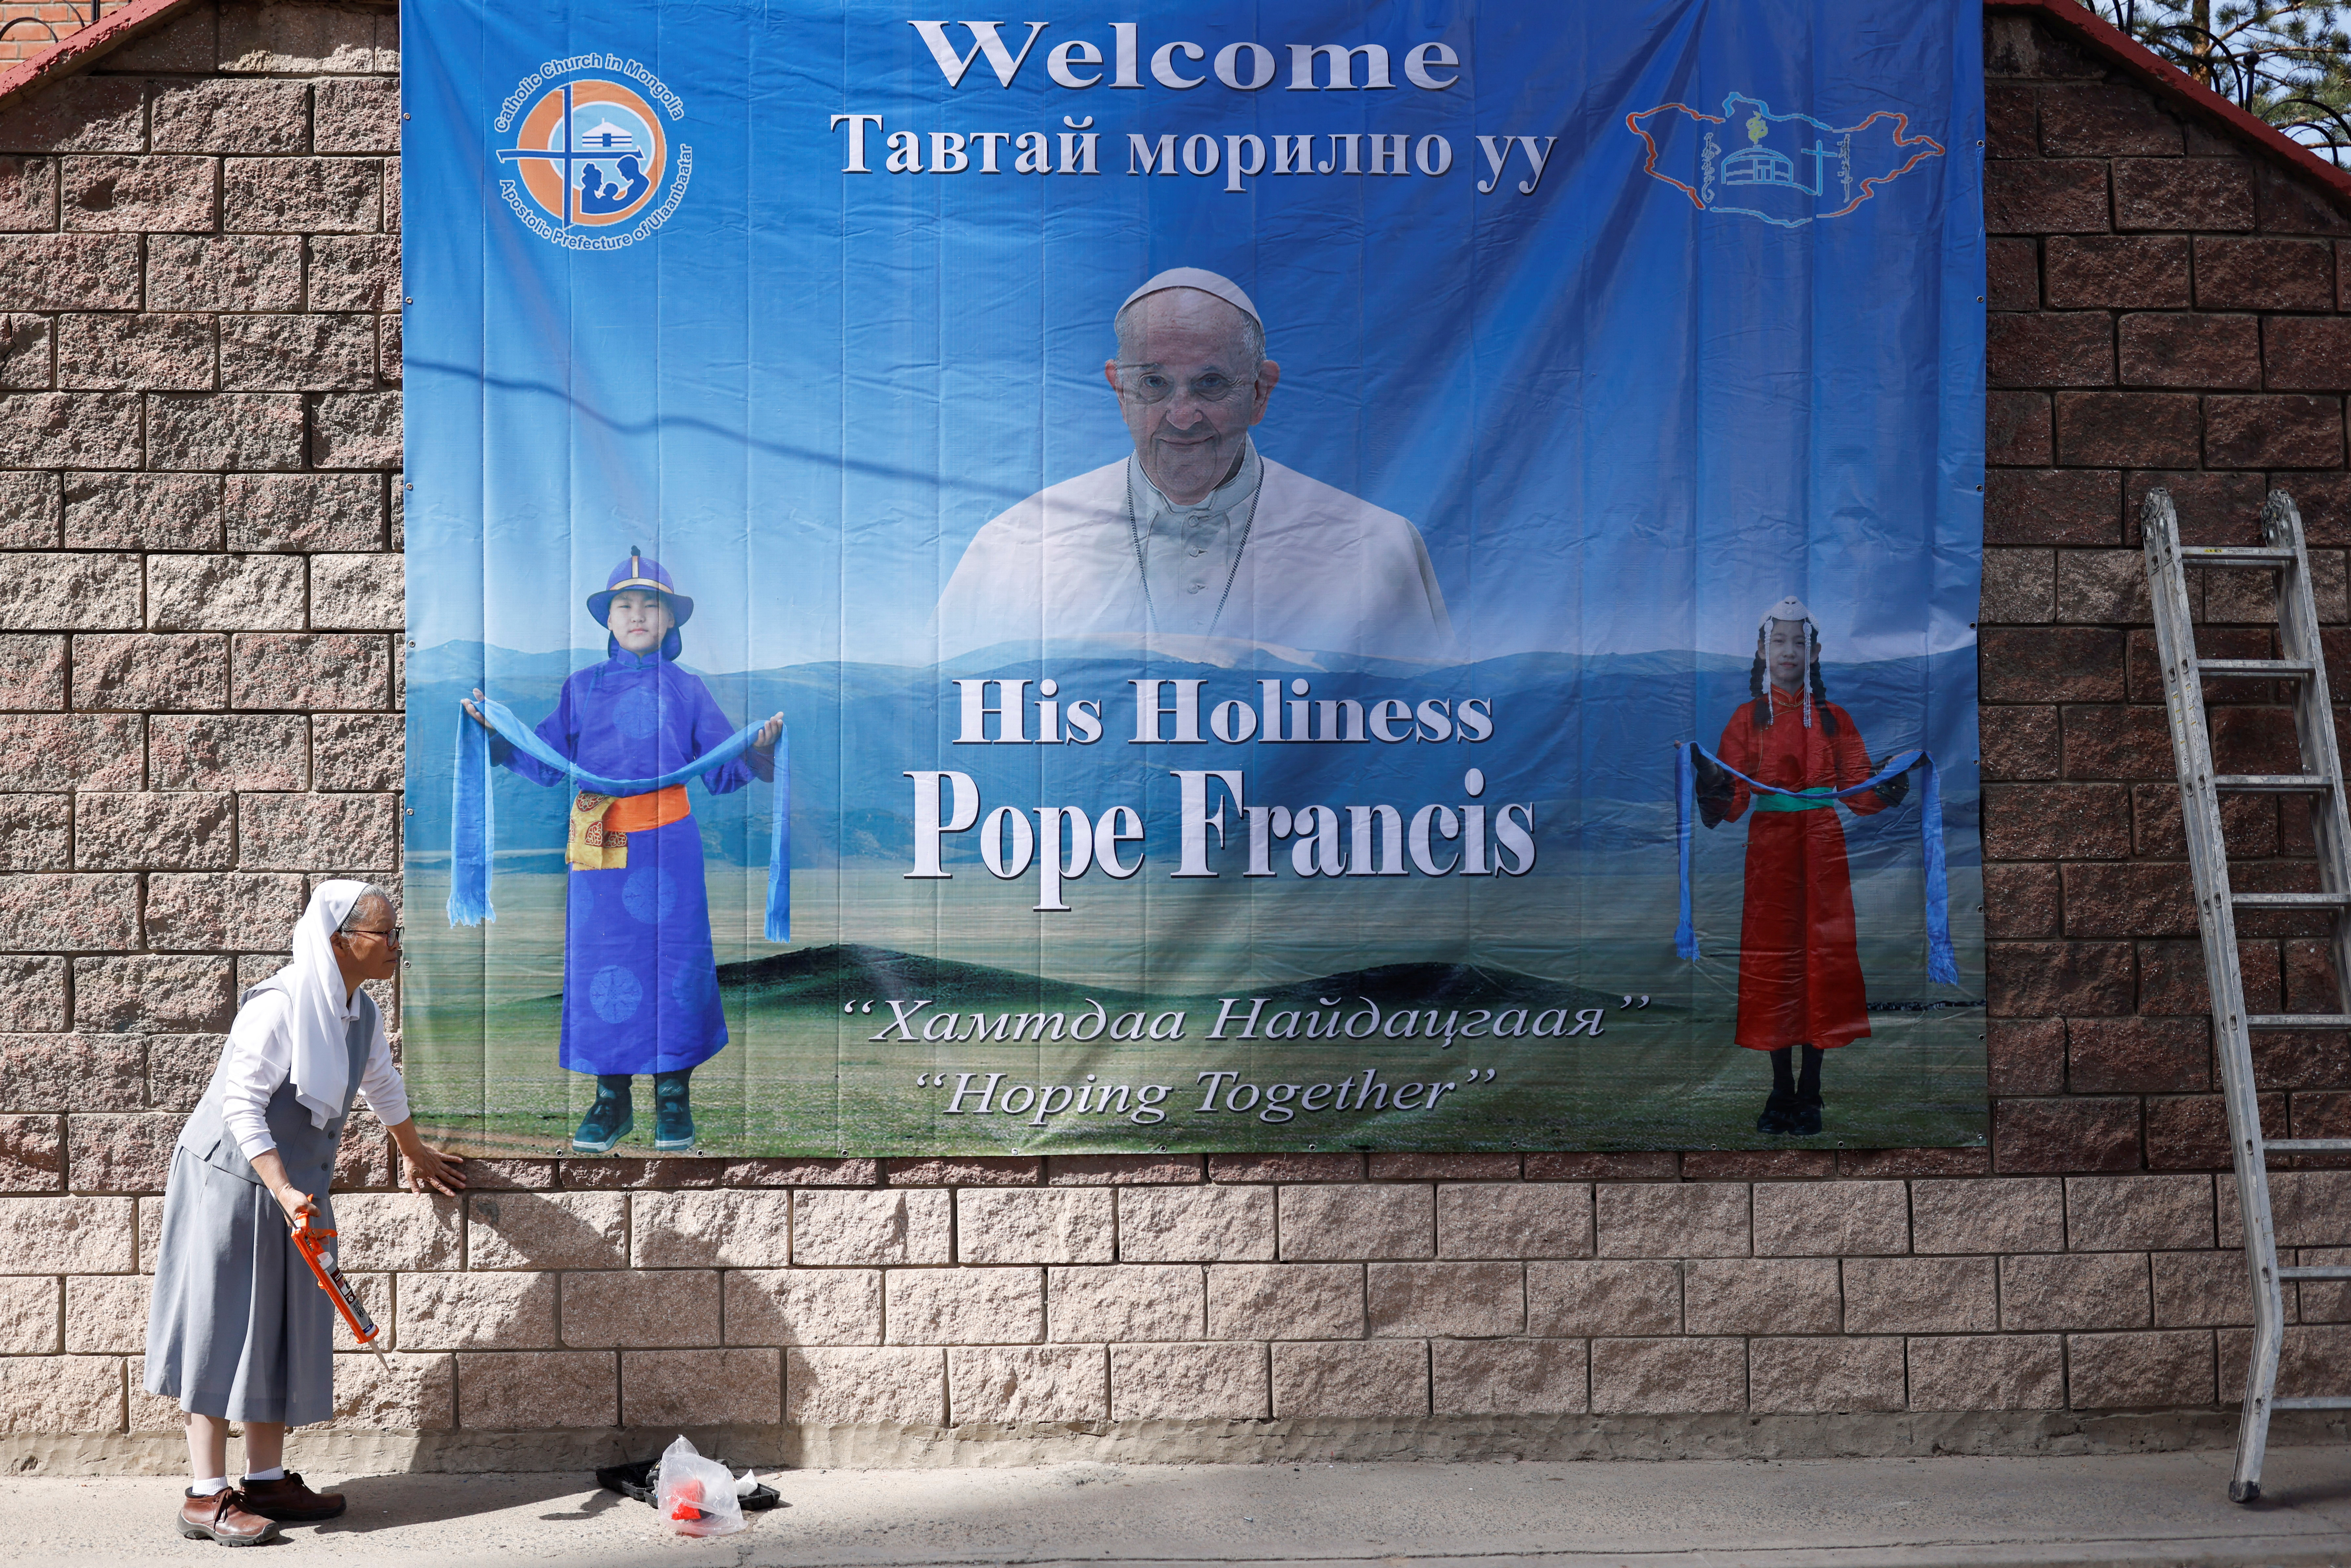 A nun installs a poster with an image of Pope Francis outside the bishop’s house, where he is expected to stay during his Apostolic Journey, one day ahead of his arrival in Ulaanbaatar